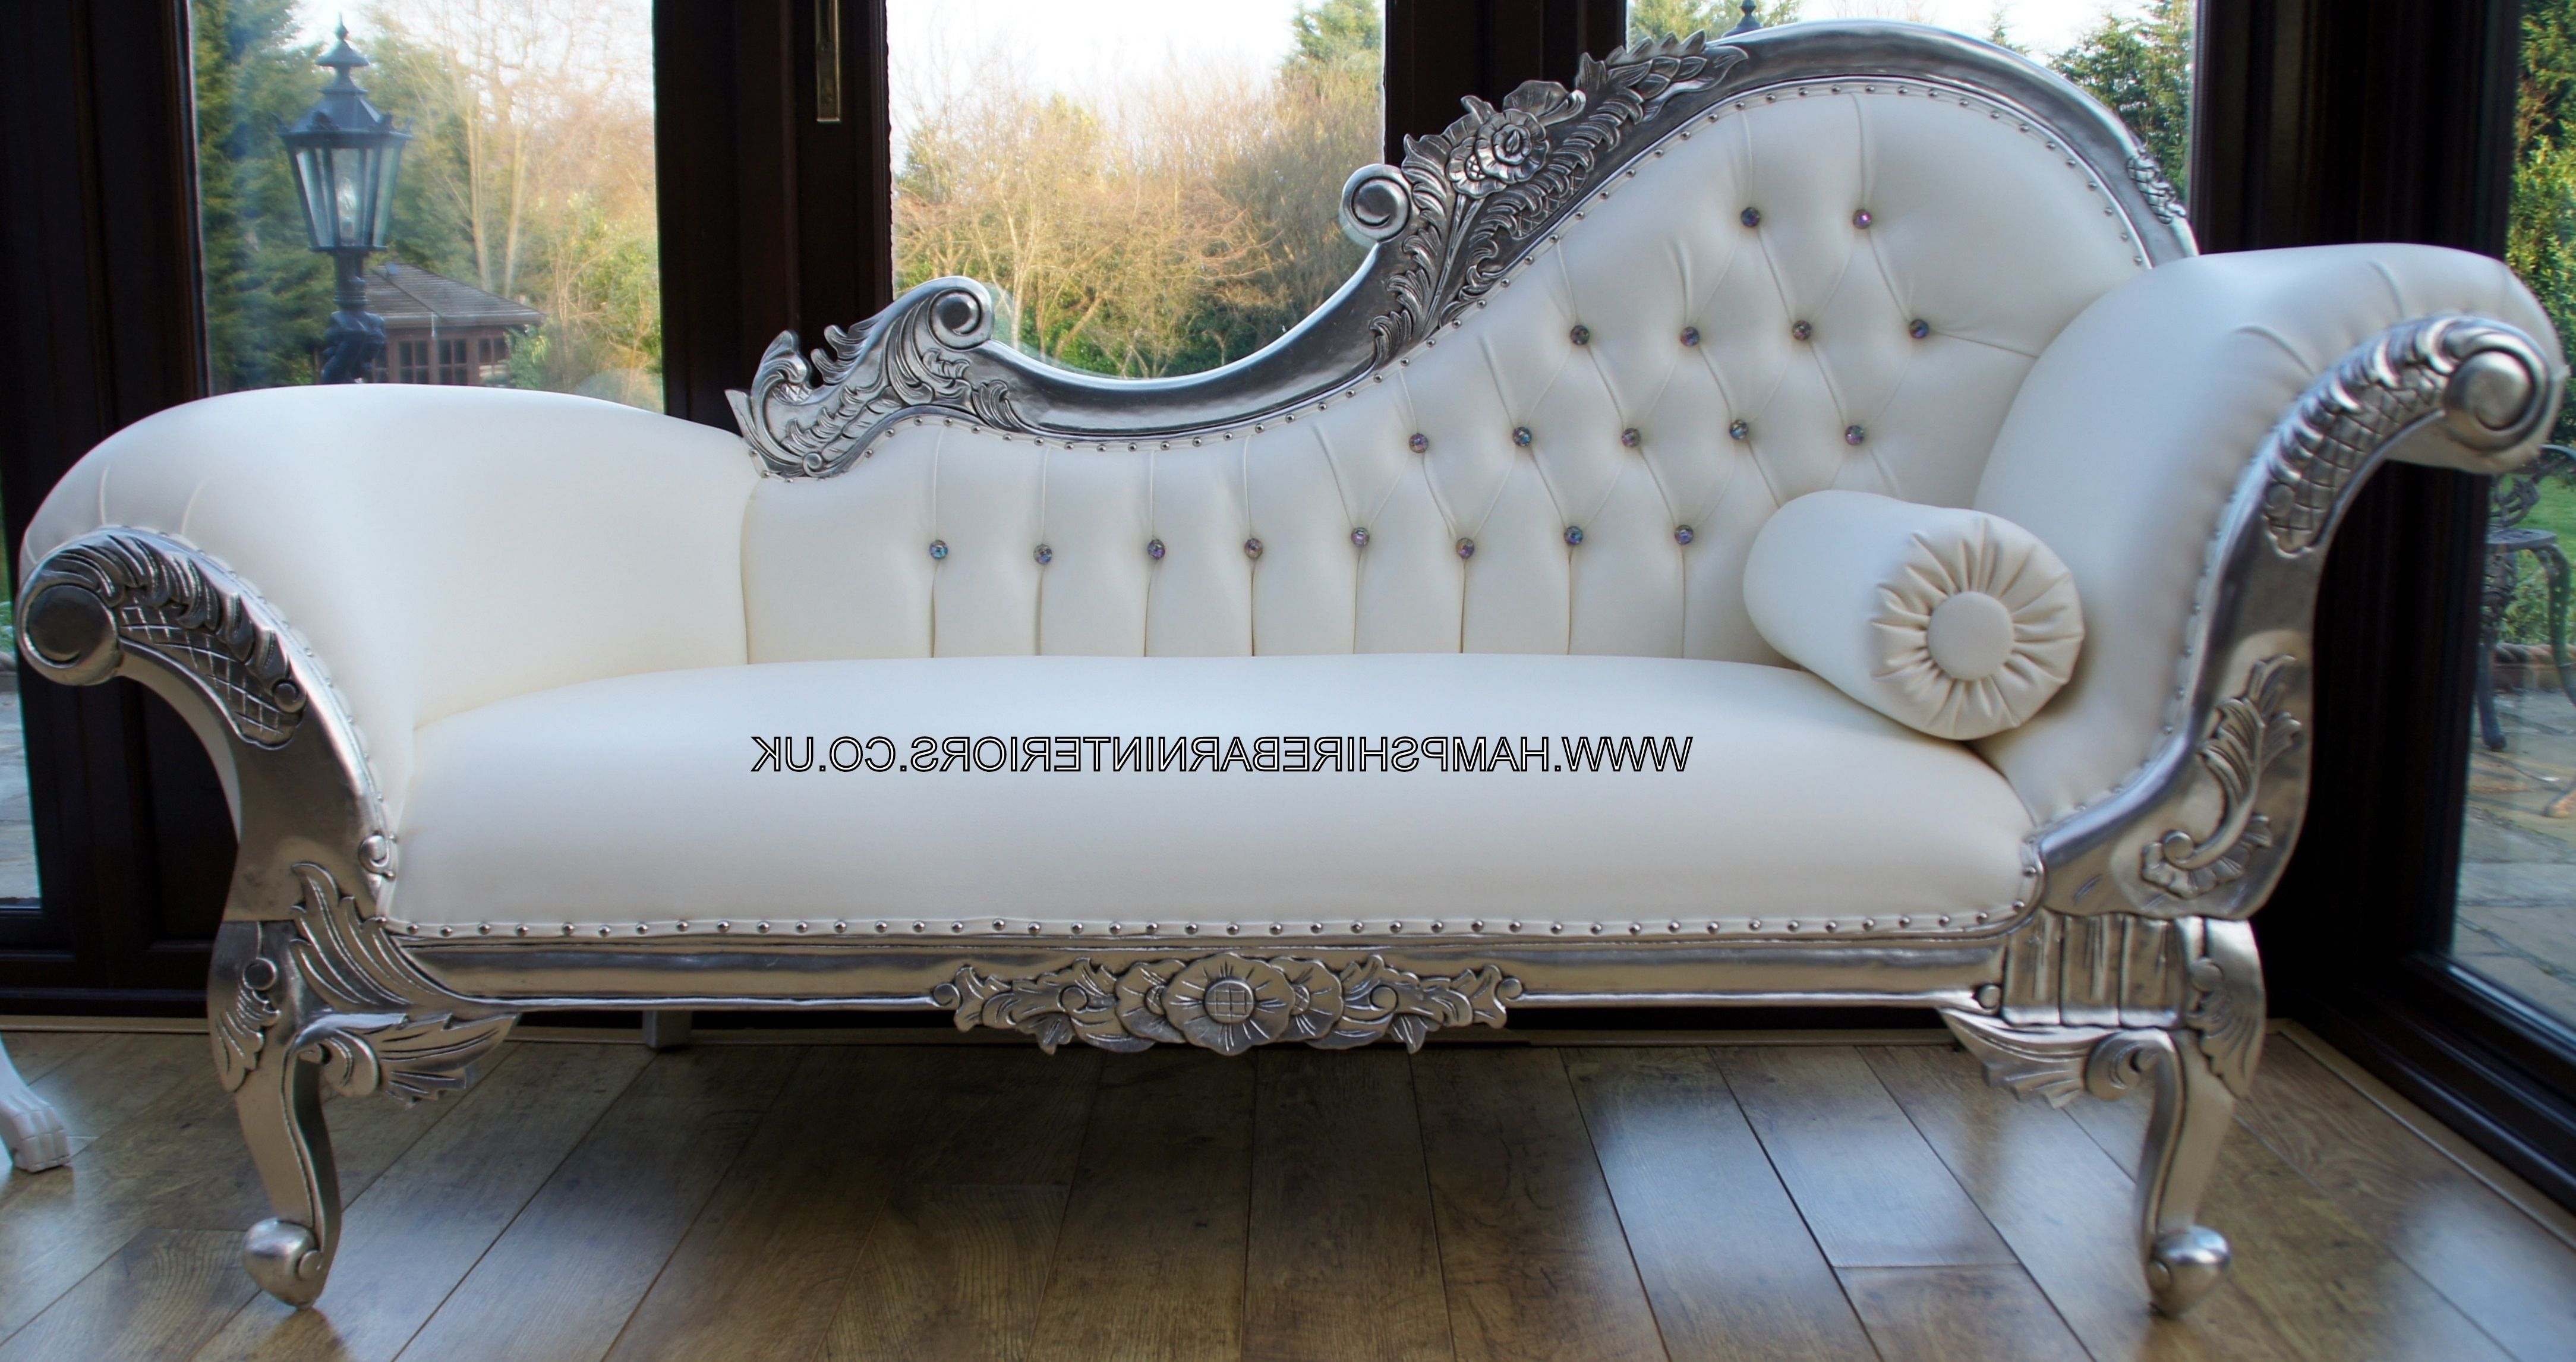 Most Up To Date White Leather Chaise Lounges Throughout Chaise Lounge Chair White Leather • Lounge Chairs Ideas (View 1 of 15)